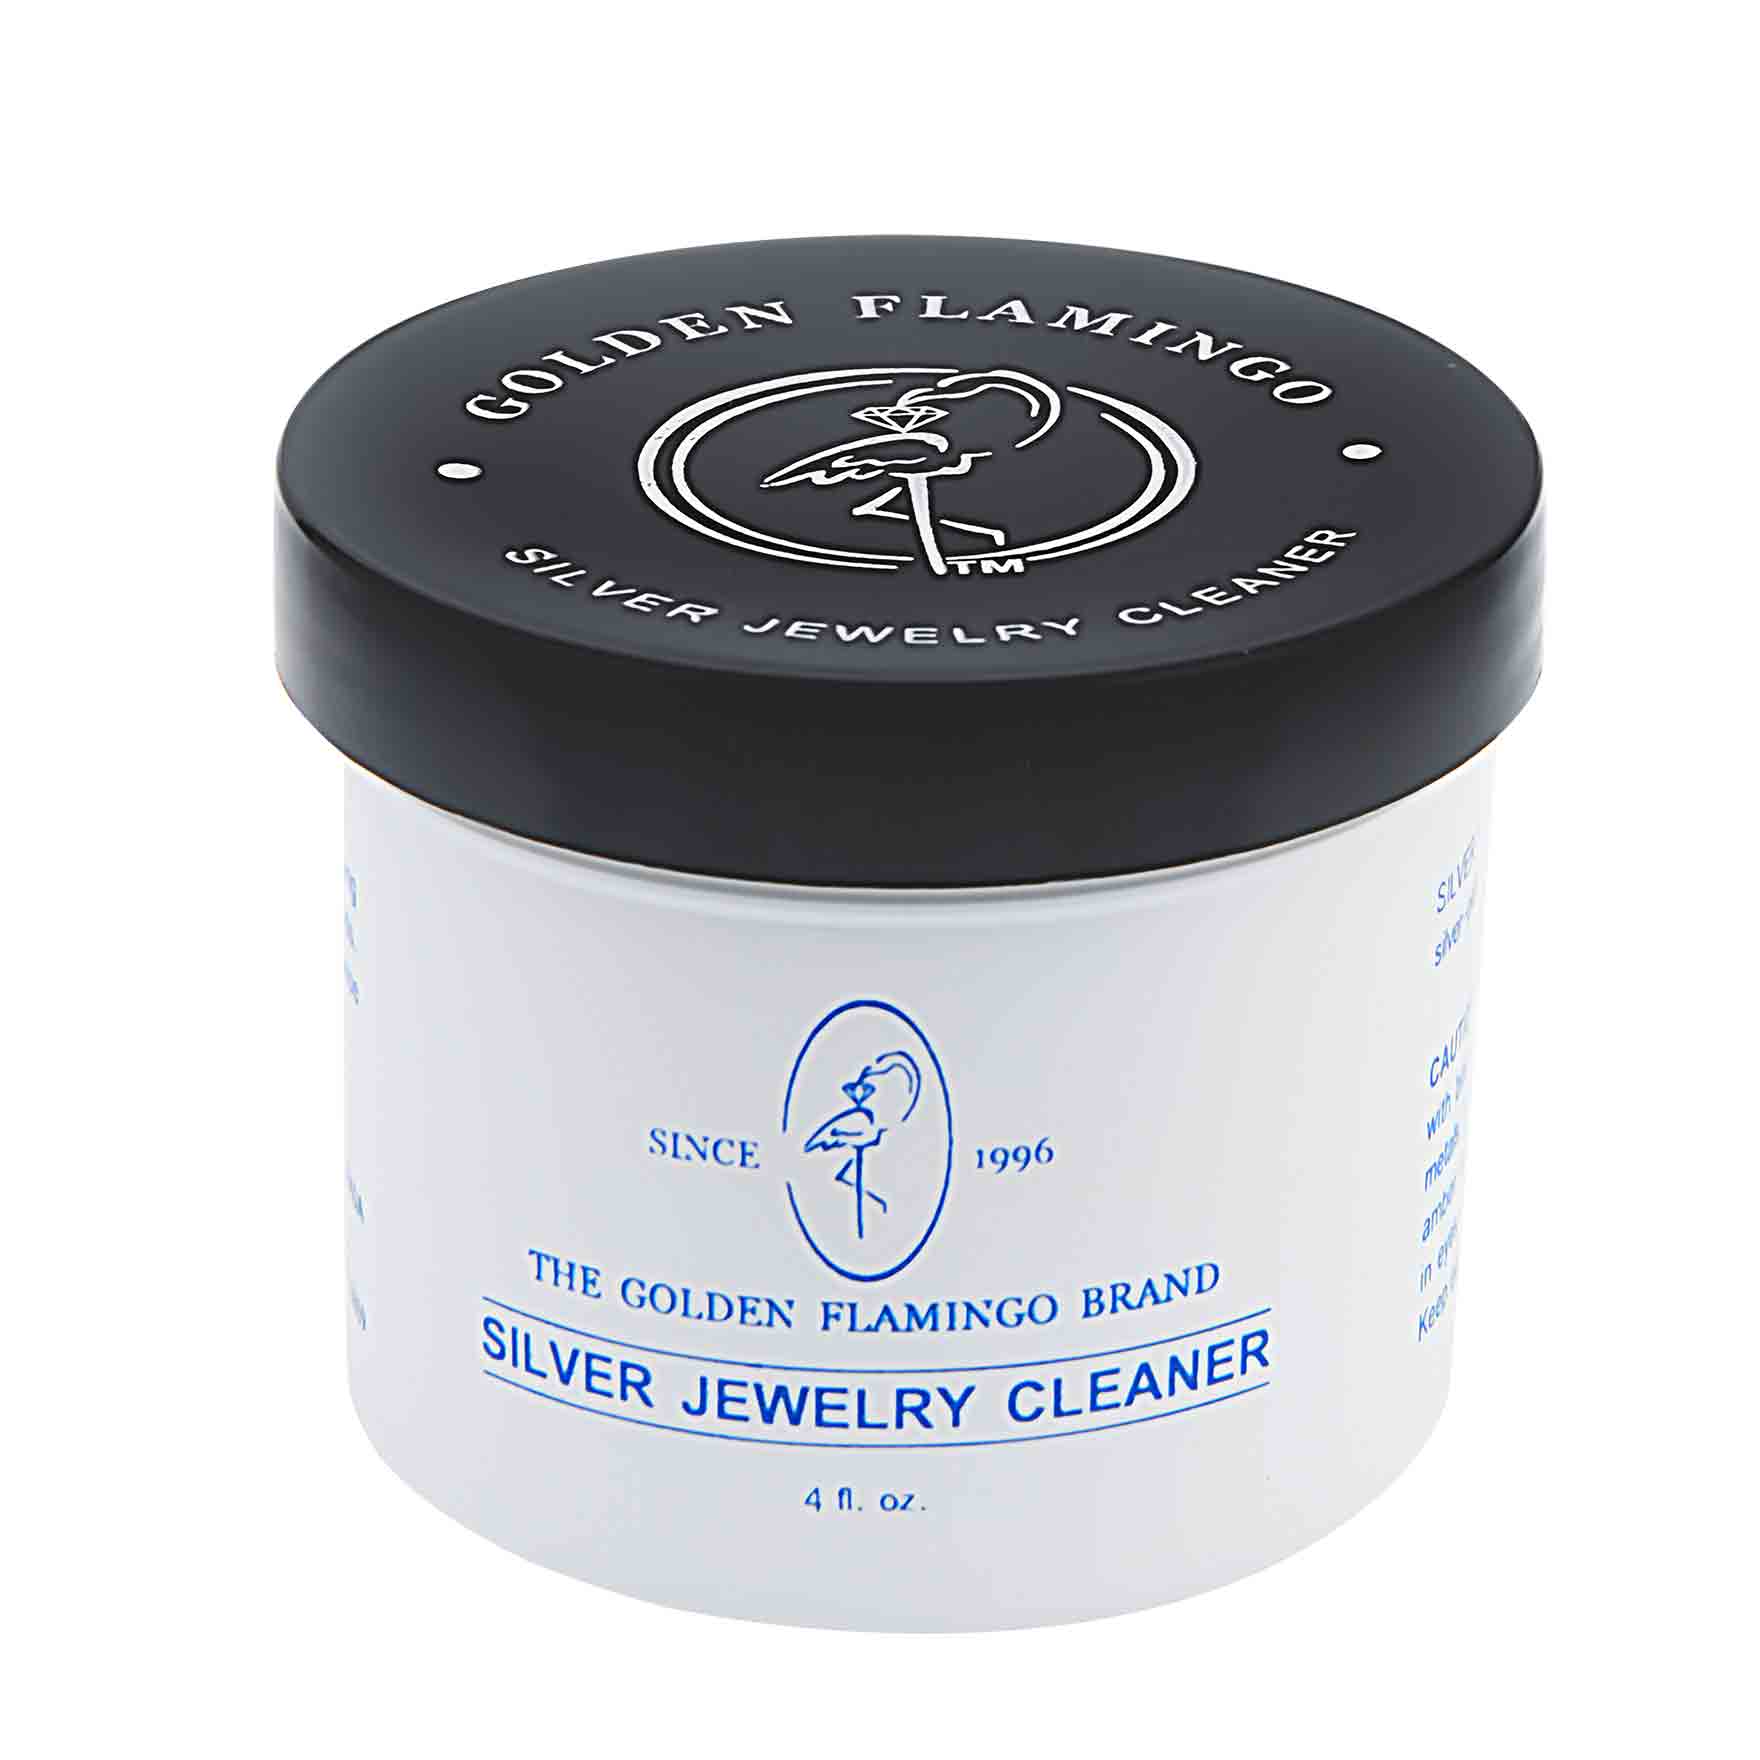 Silver Jewelry Cleaning Solution Kit, Liquid Cleanser, Polishing